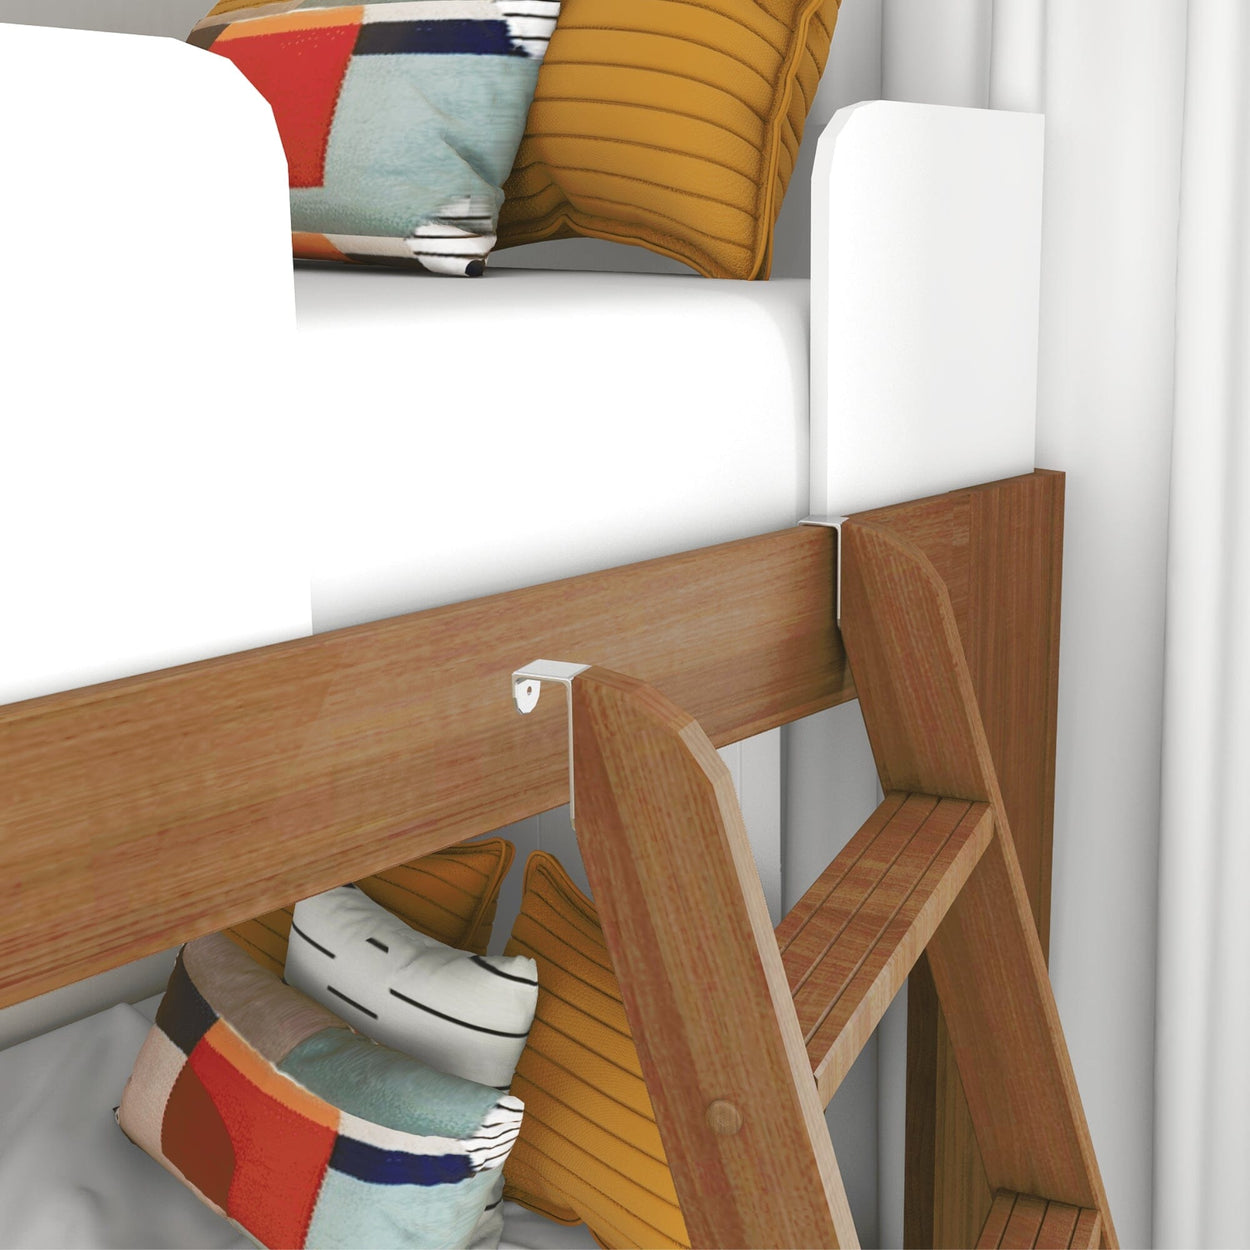 200214-527 : Bunk Beds Mid-Century Modern Twin over Twin Low Bunk Bed, White/Pecan